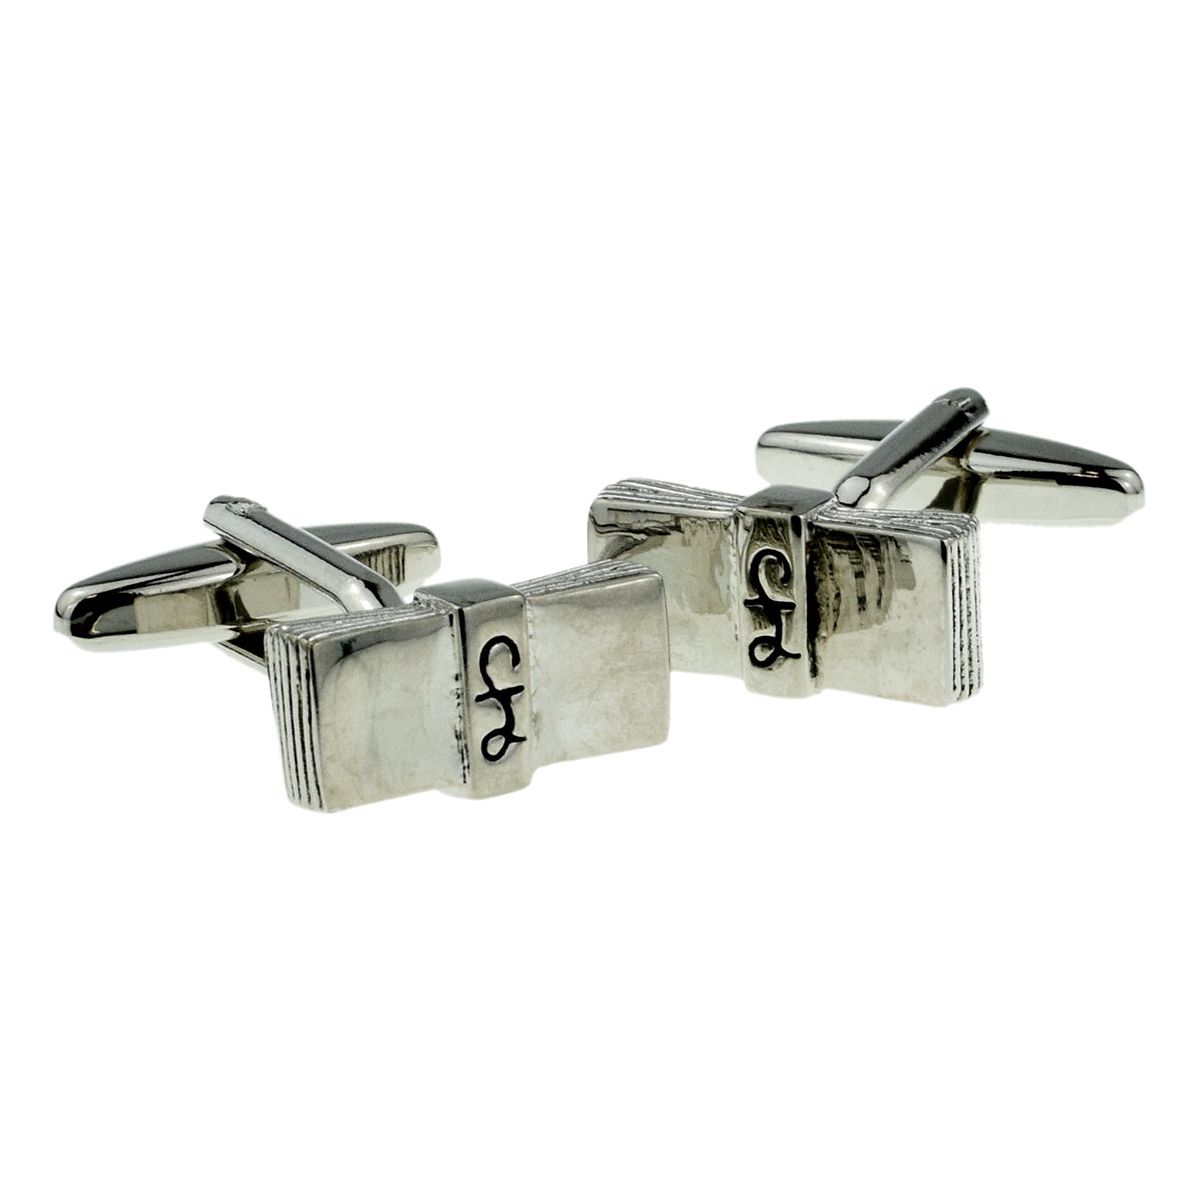 Wad of Pound Notes Cufflinks - Ashton and Finch